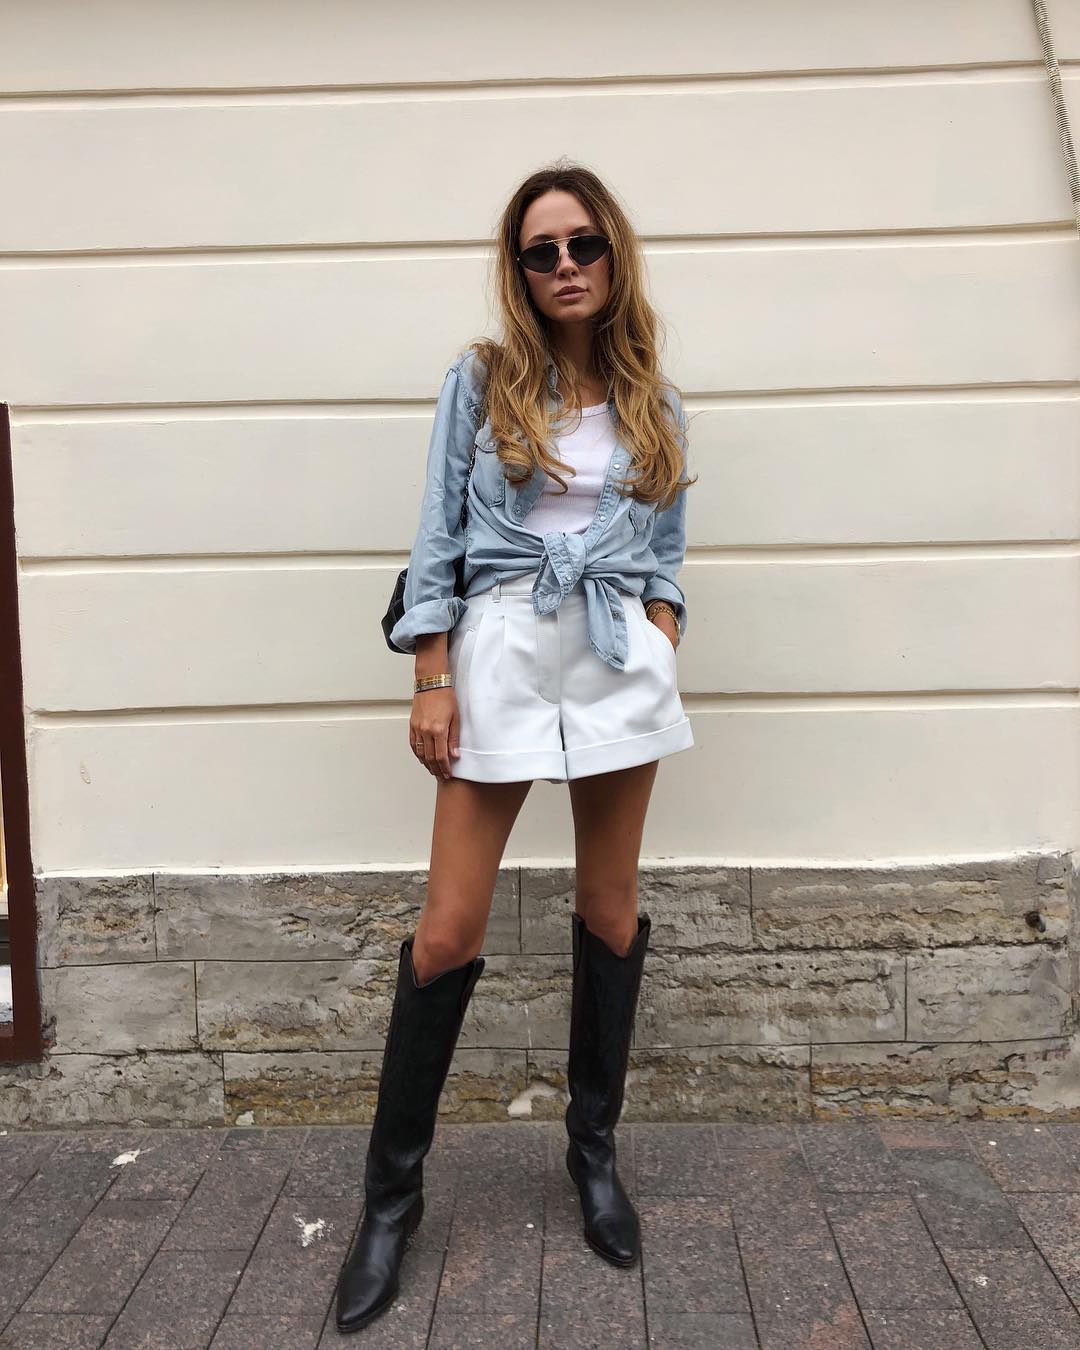 We Love This Chic Way to Style Boots for Spring